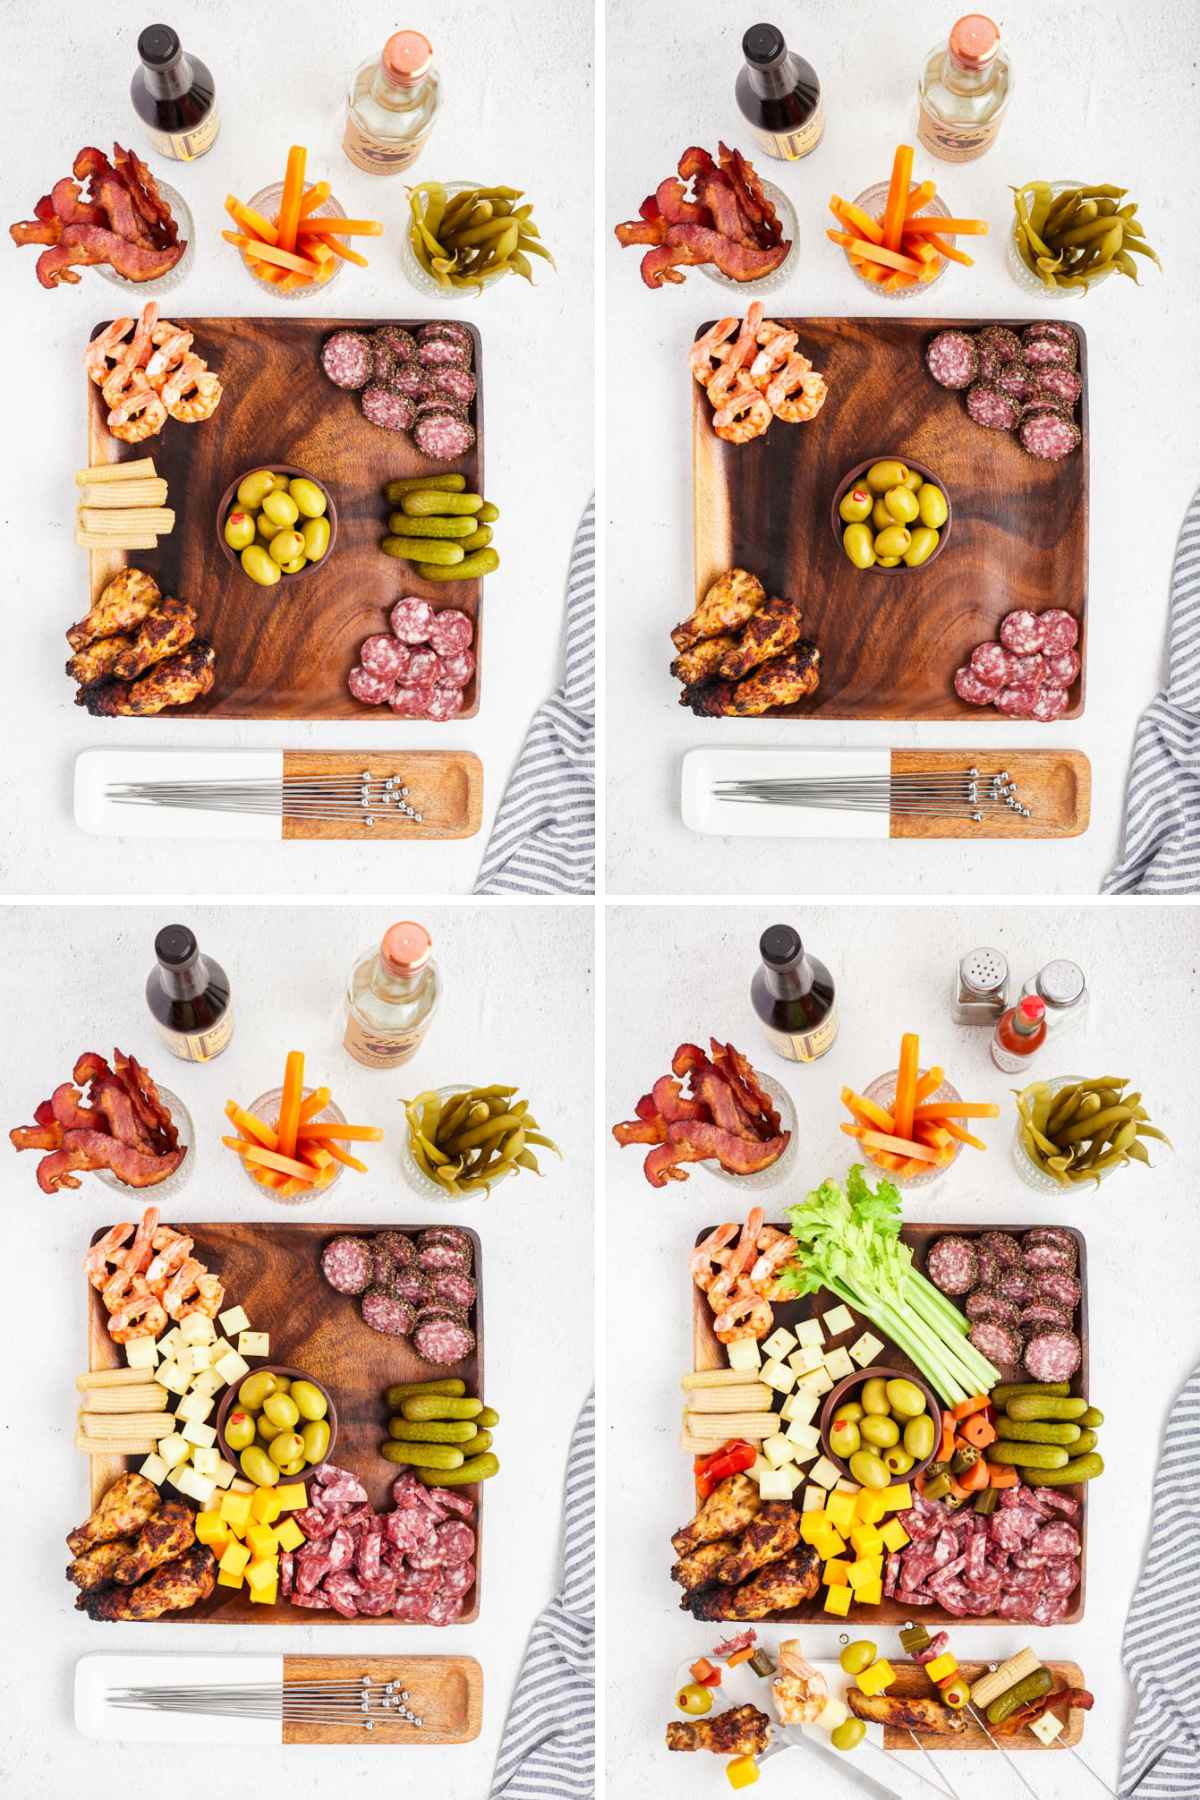 How to make a bloody mary charcuterie board step by step with lots of bloody mary garnishes.